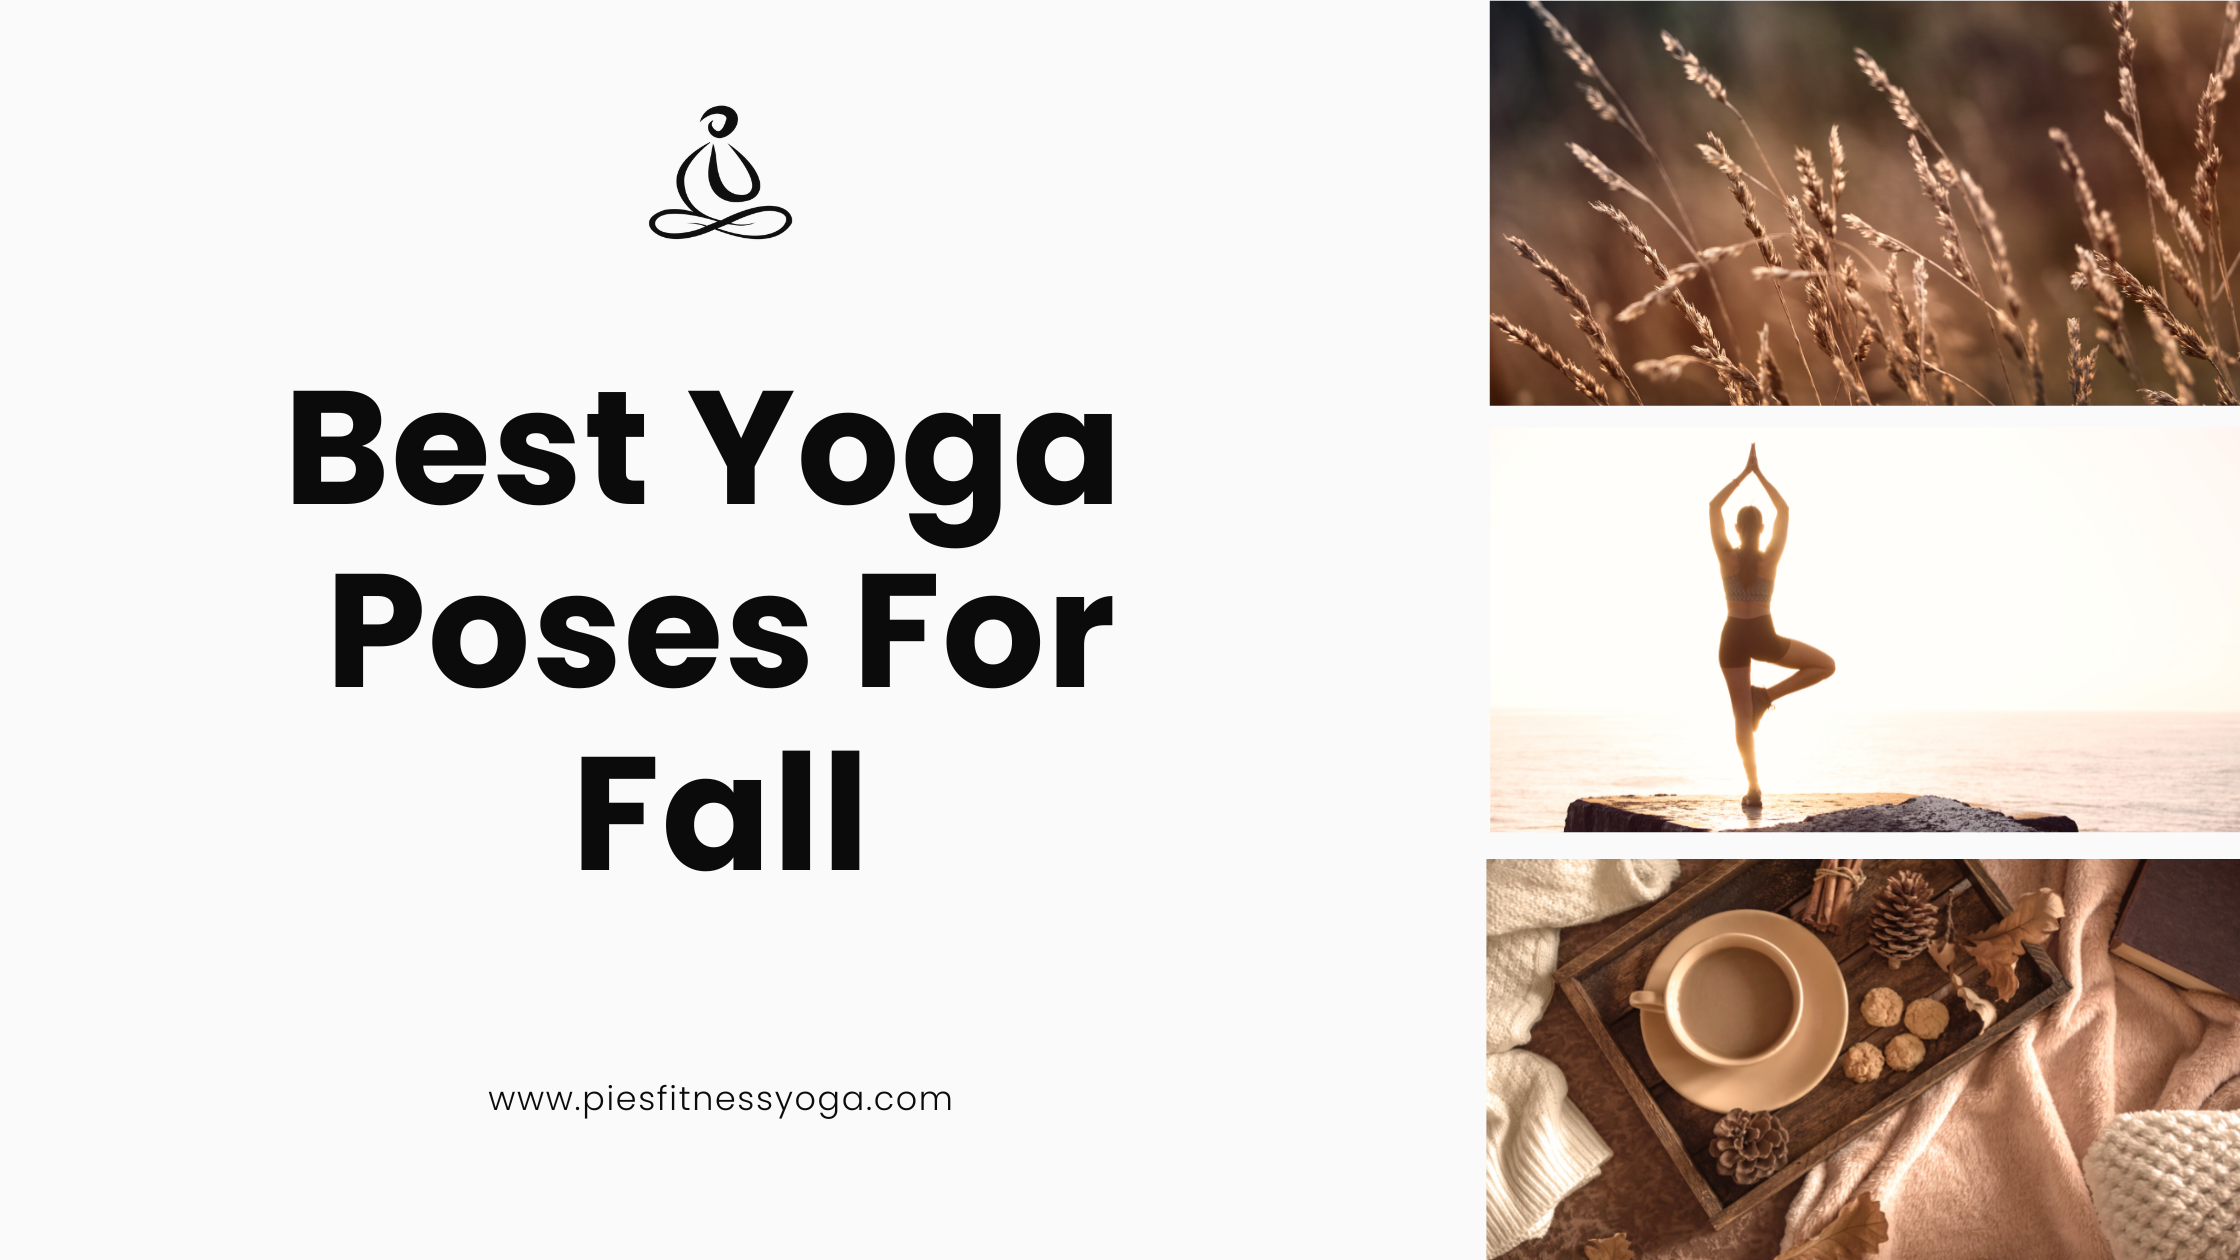 Best Yoga Tips For The Fall